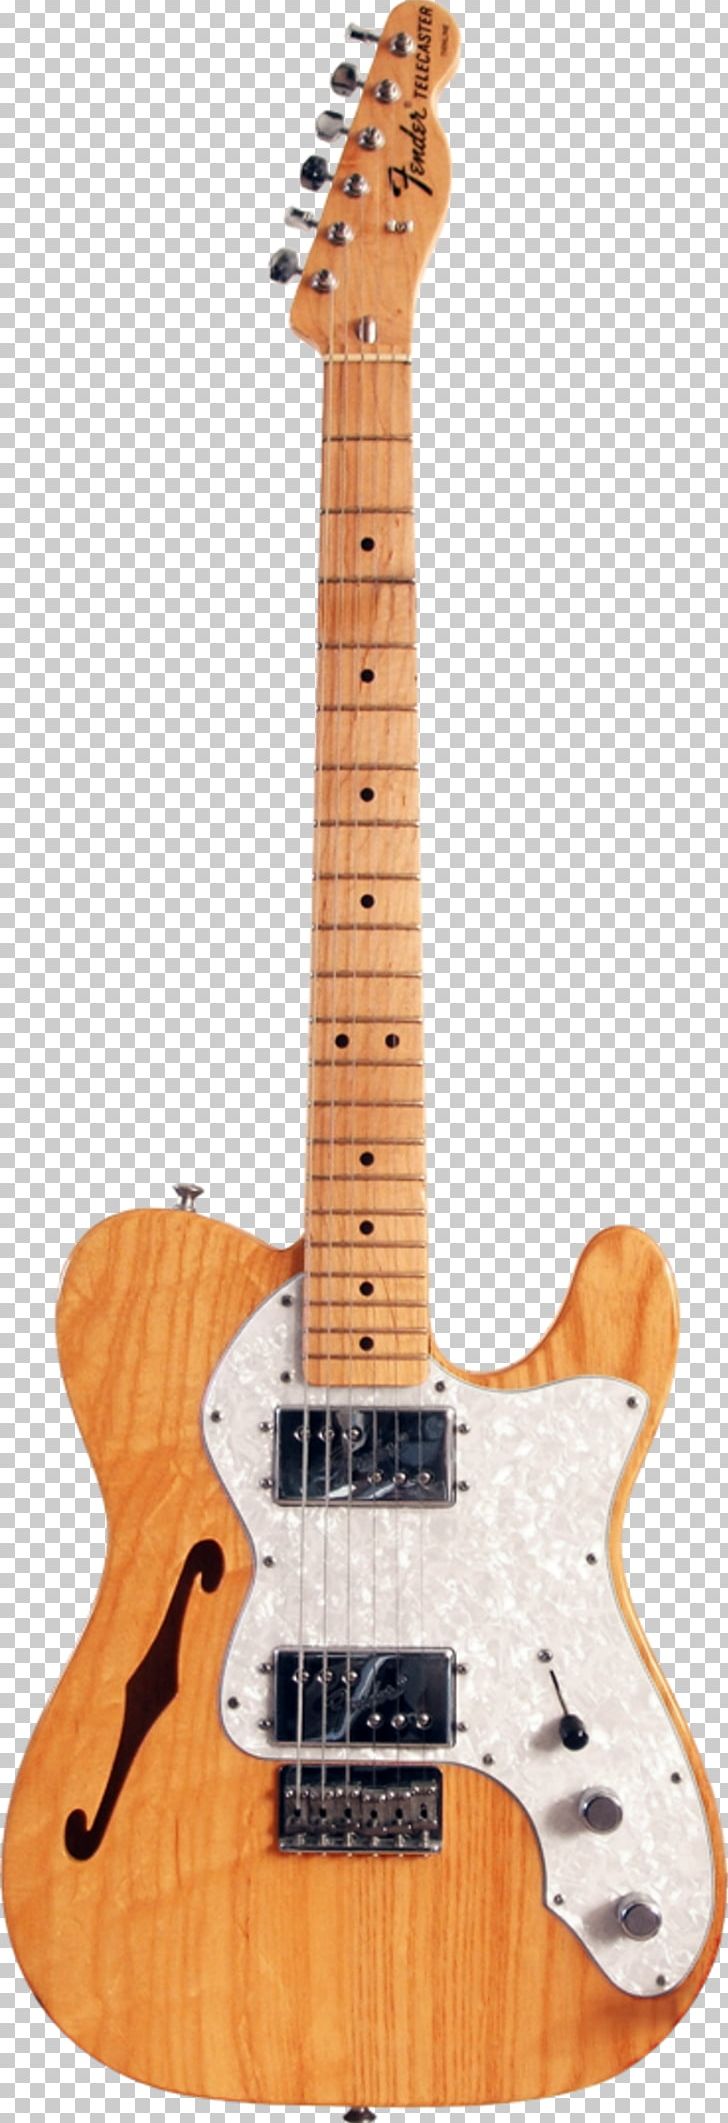 Fender Telecaster Thinline Fender Stratocaster Fender Telecaster Deluxe Fender Musical Instruments Corporation PNG, Clipart, Acoustic Electric Guitar, Acoustic Guitar, Bass, Guitar, Guitar Accessory Free PNG Download